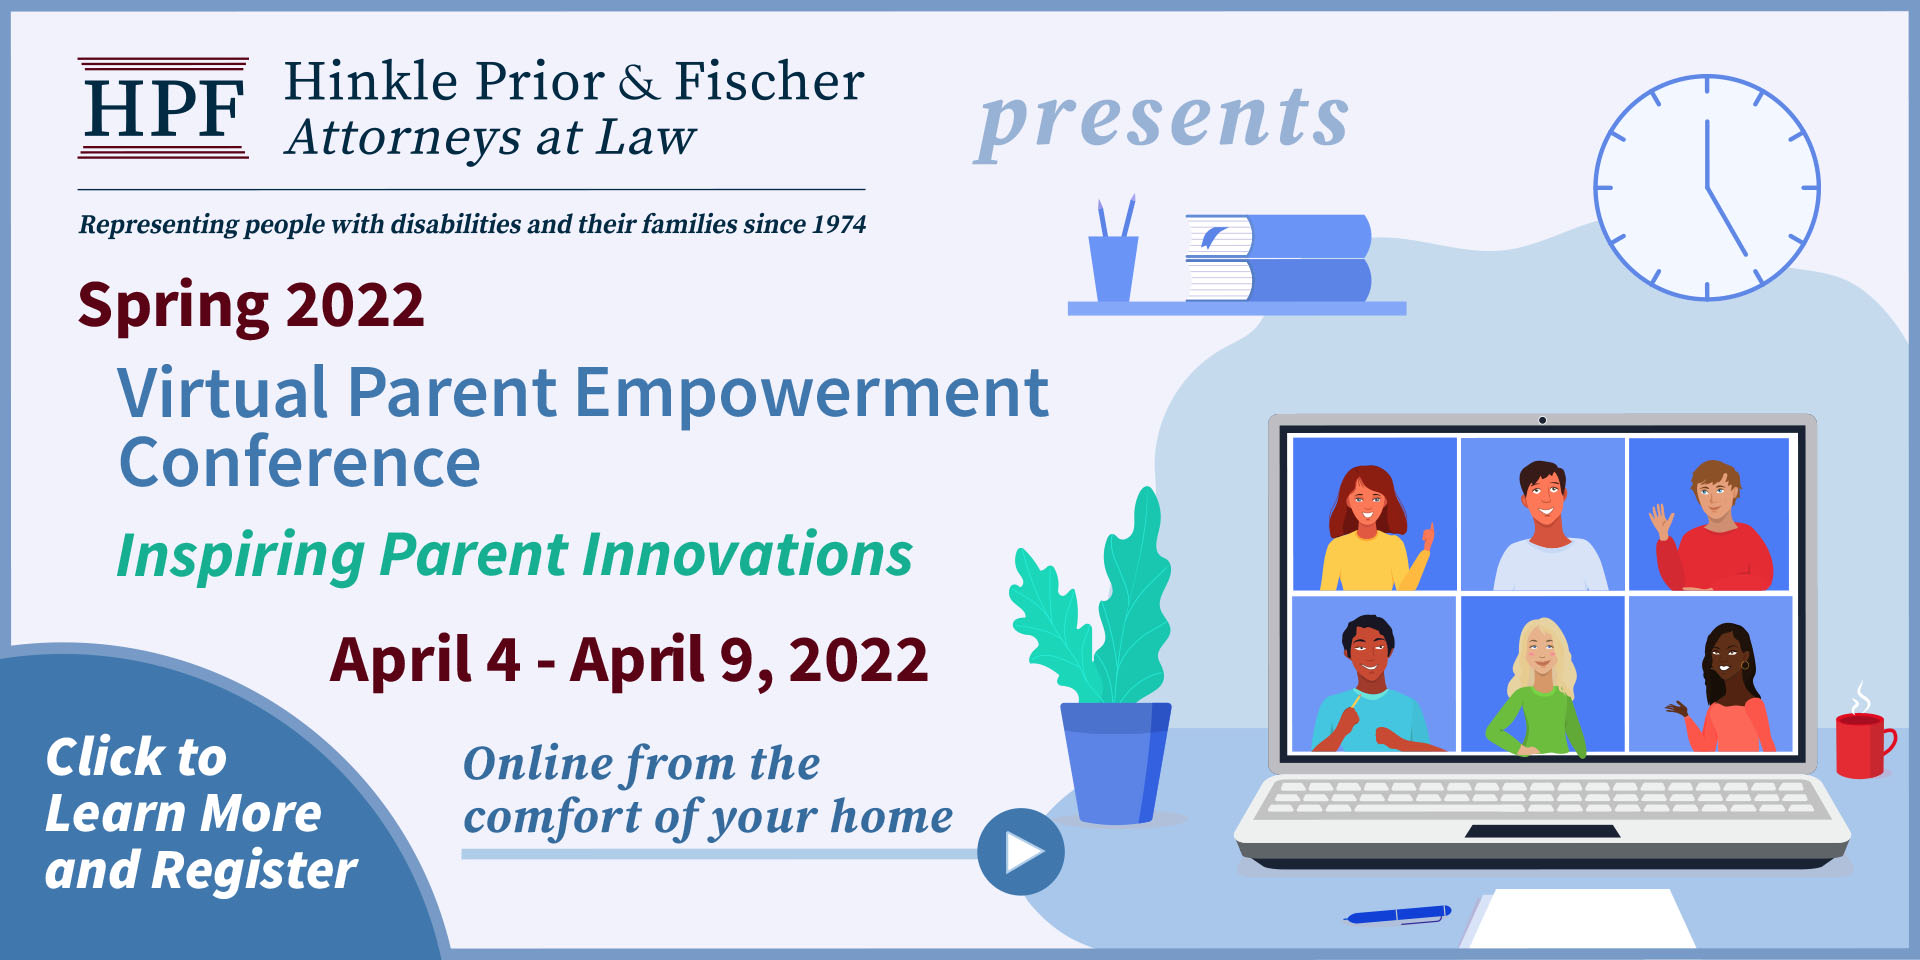 Hinkle Prior & Fischer 2022 Spring Virtual Parent Empowerment Conference Banner promo April 4-9, 2022 and image link click to learn more and register